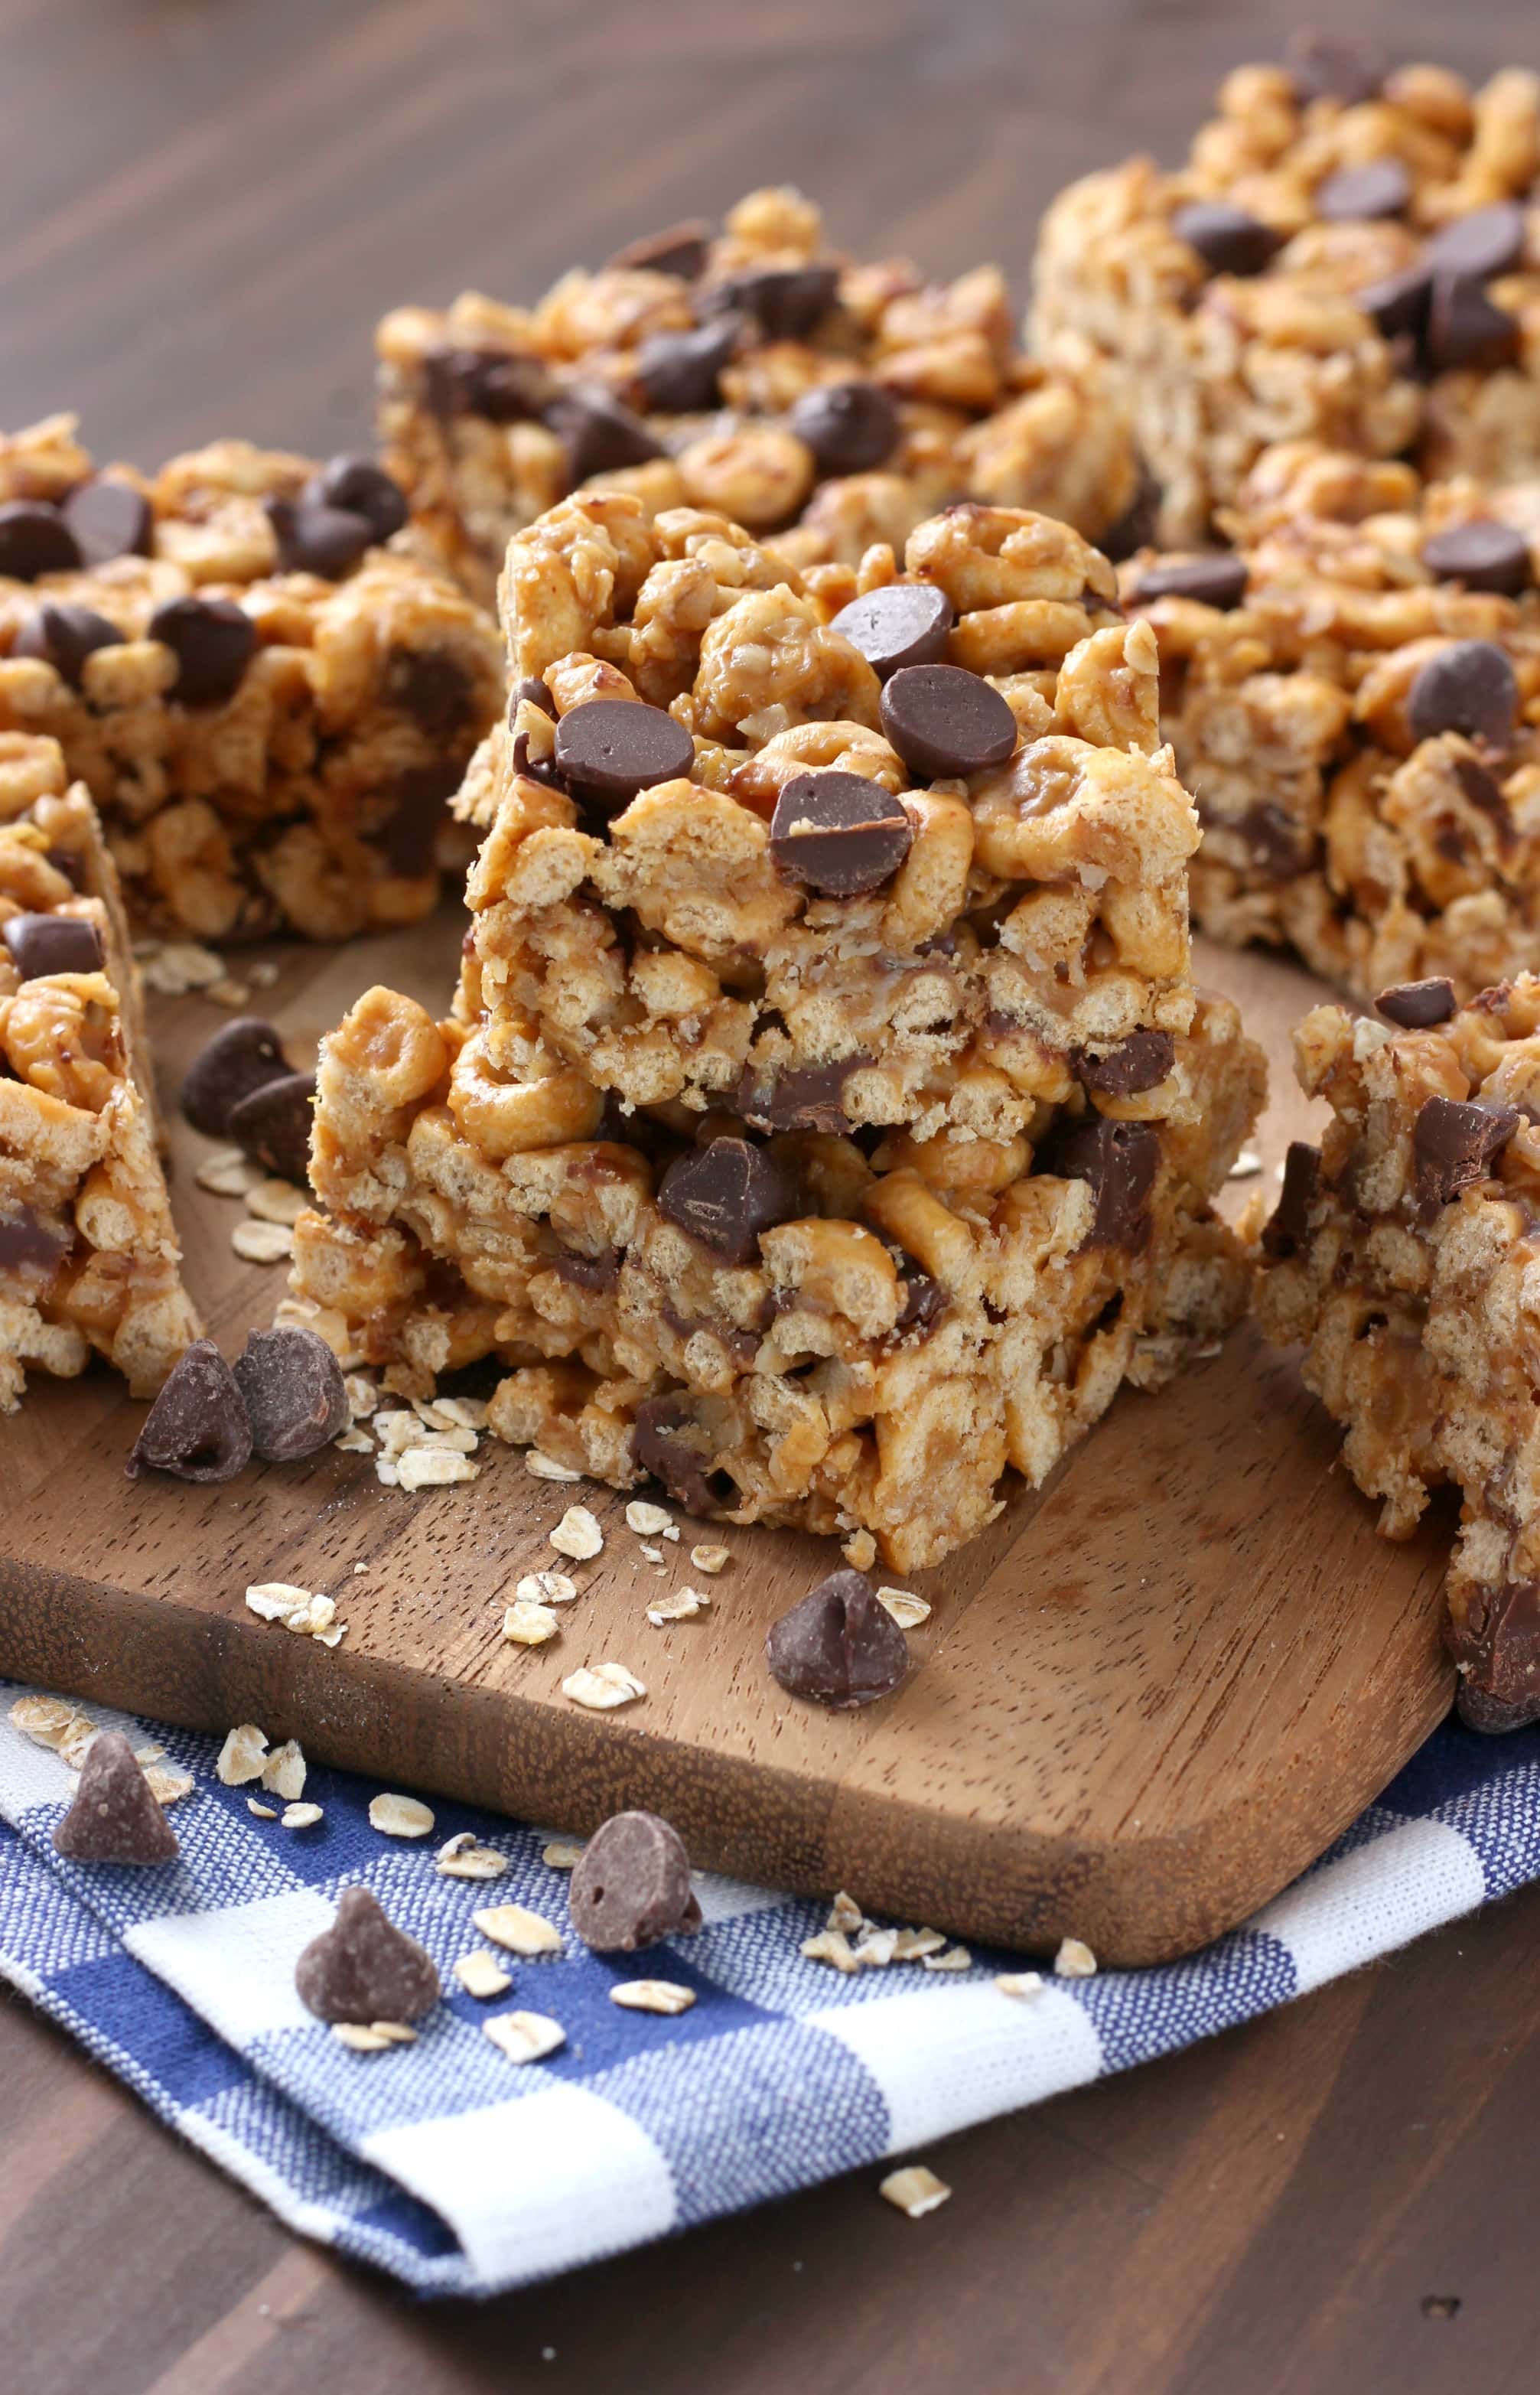 Easy Chocolate Peanut Butter Honey Cereal Bars Recipe from A Kitchen Addiction